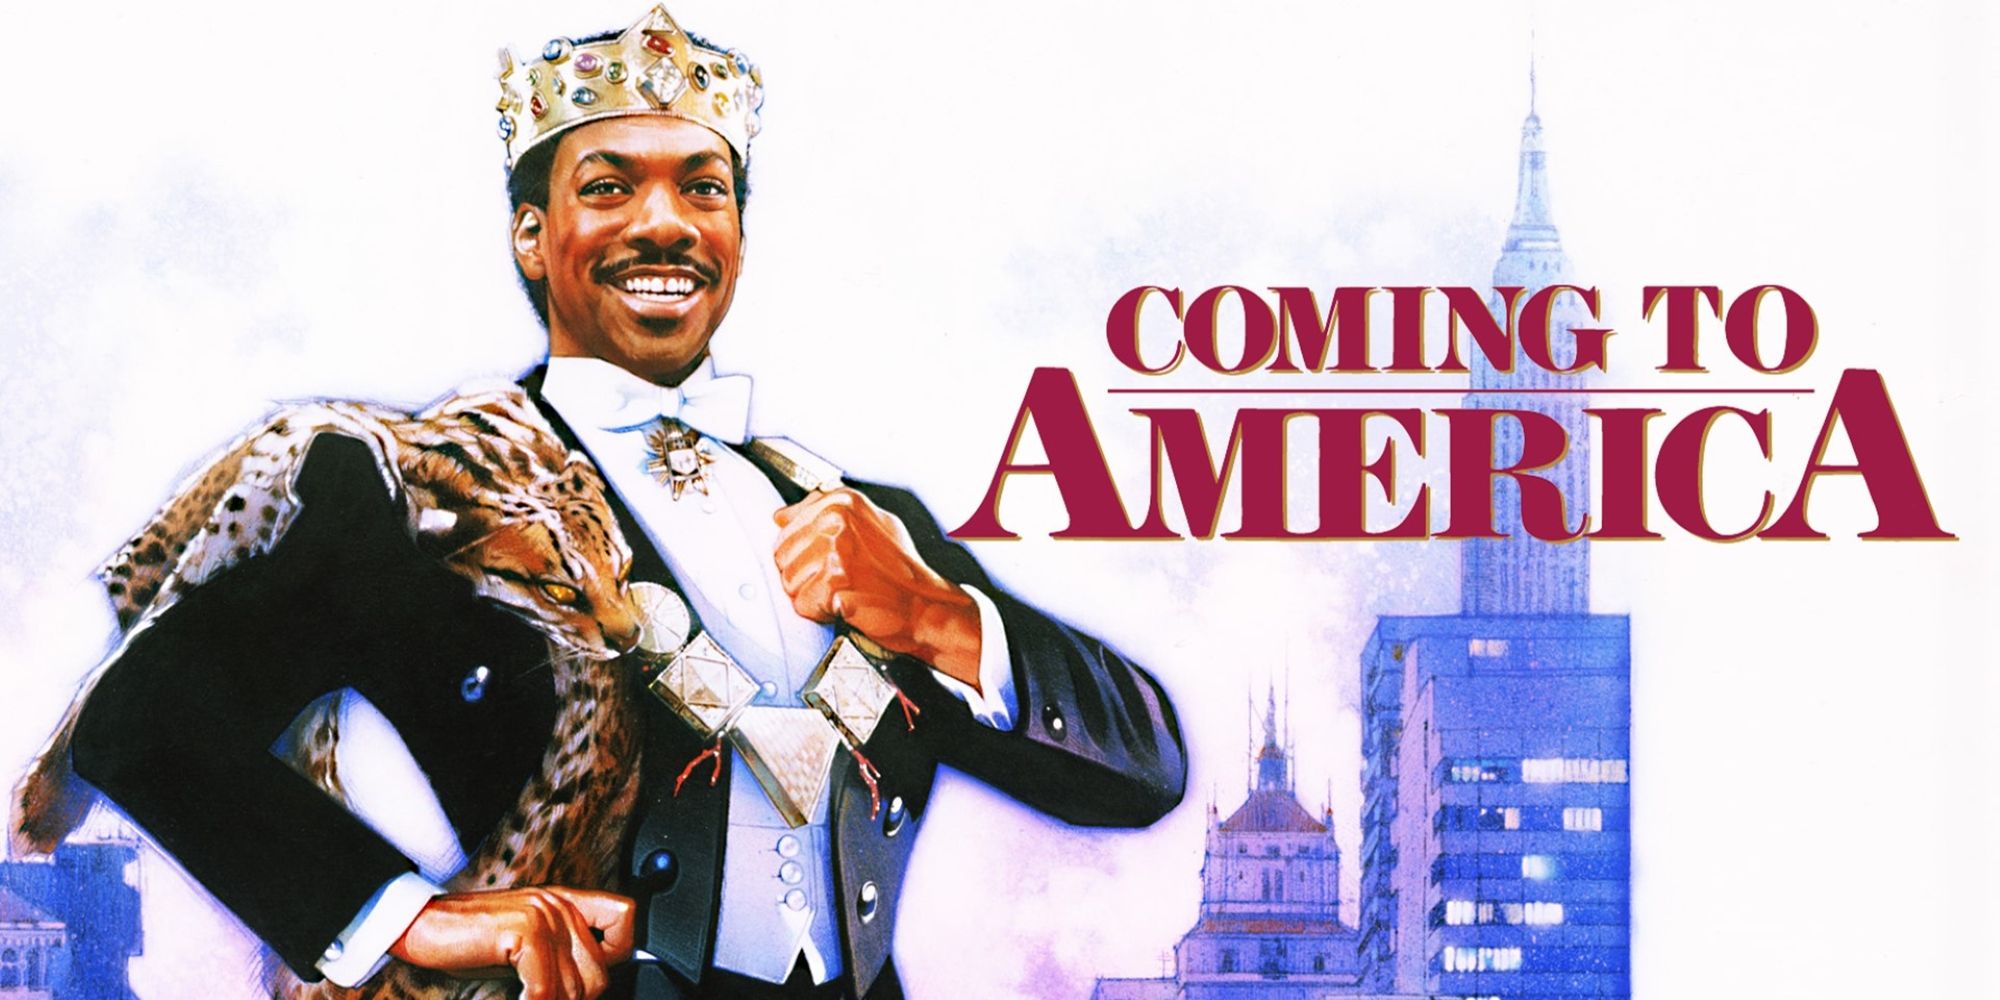 Eddie Murphy as Prince Akeem in royal clothes in Coming to America